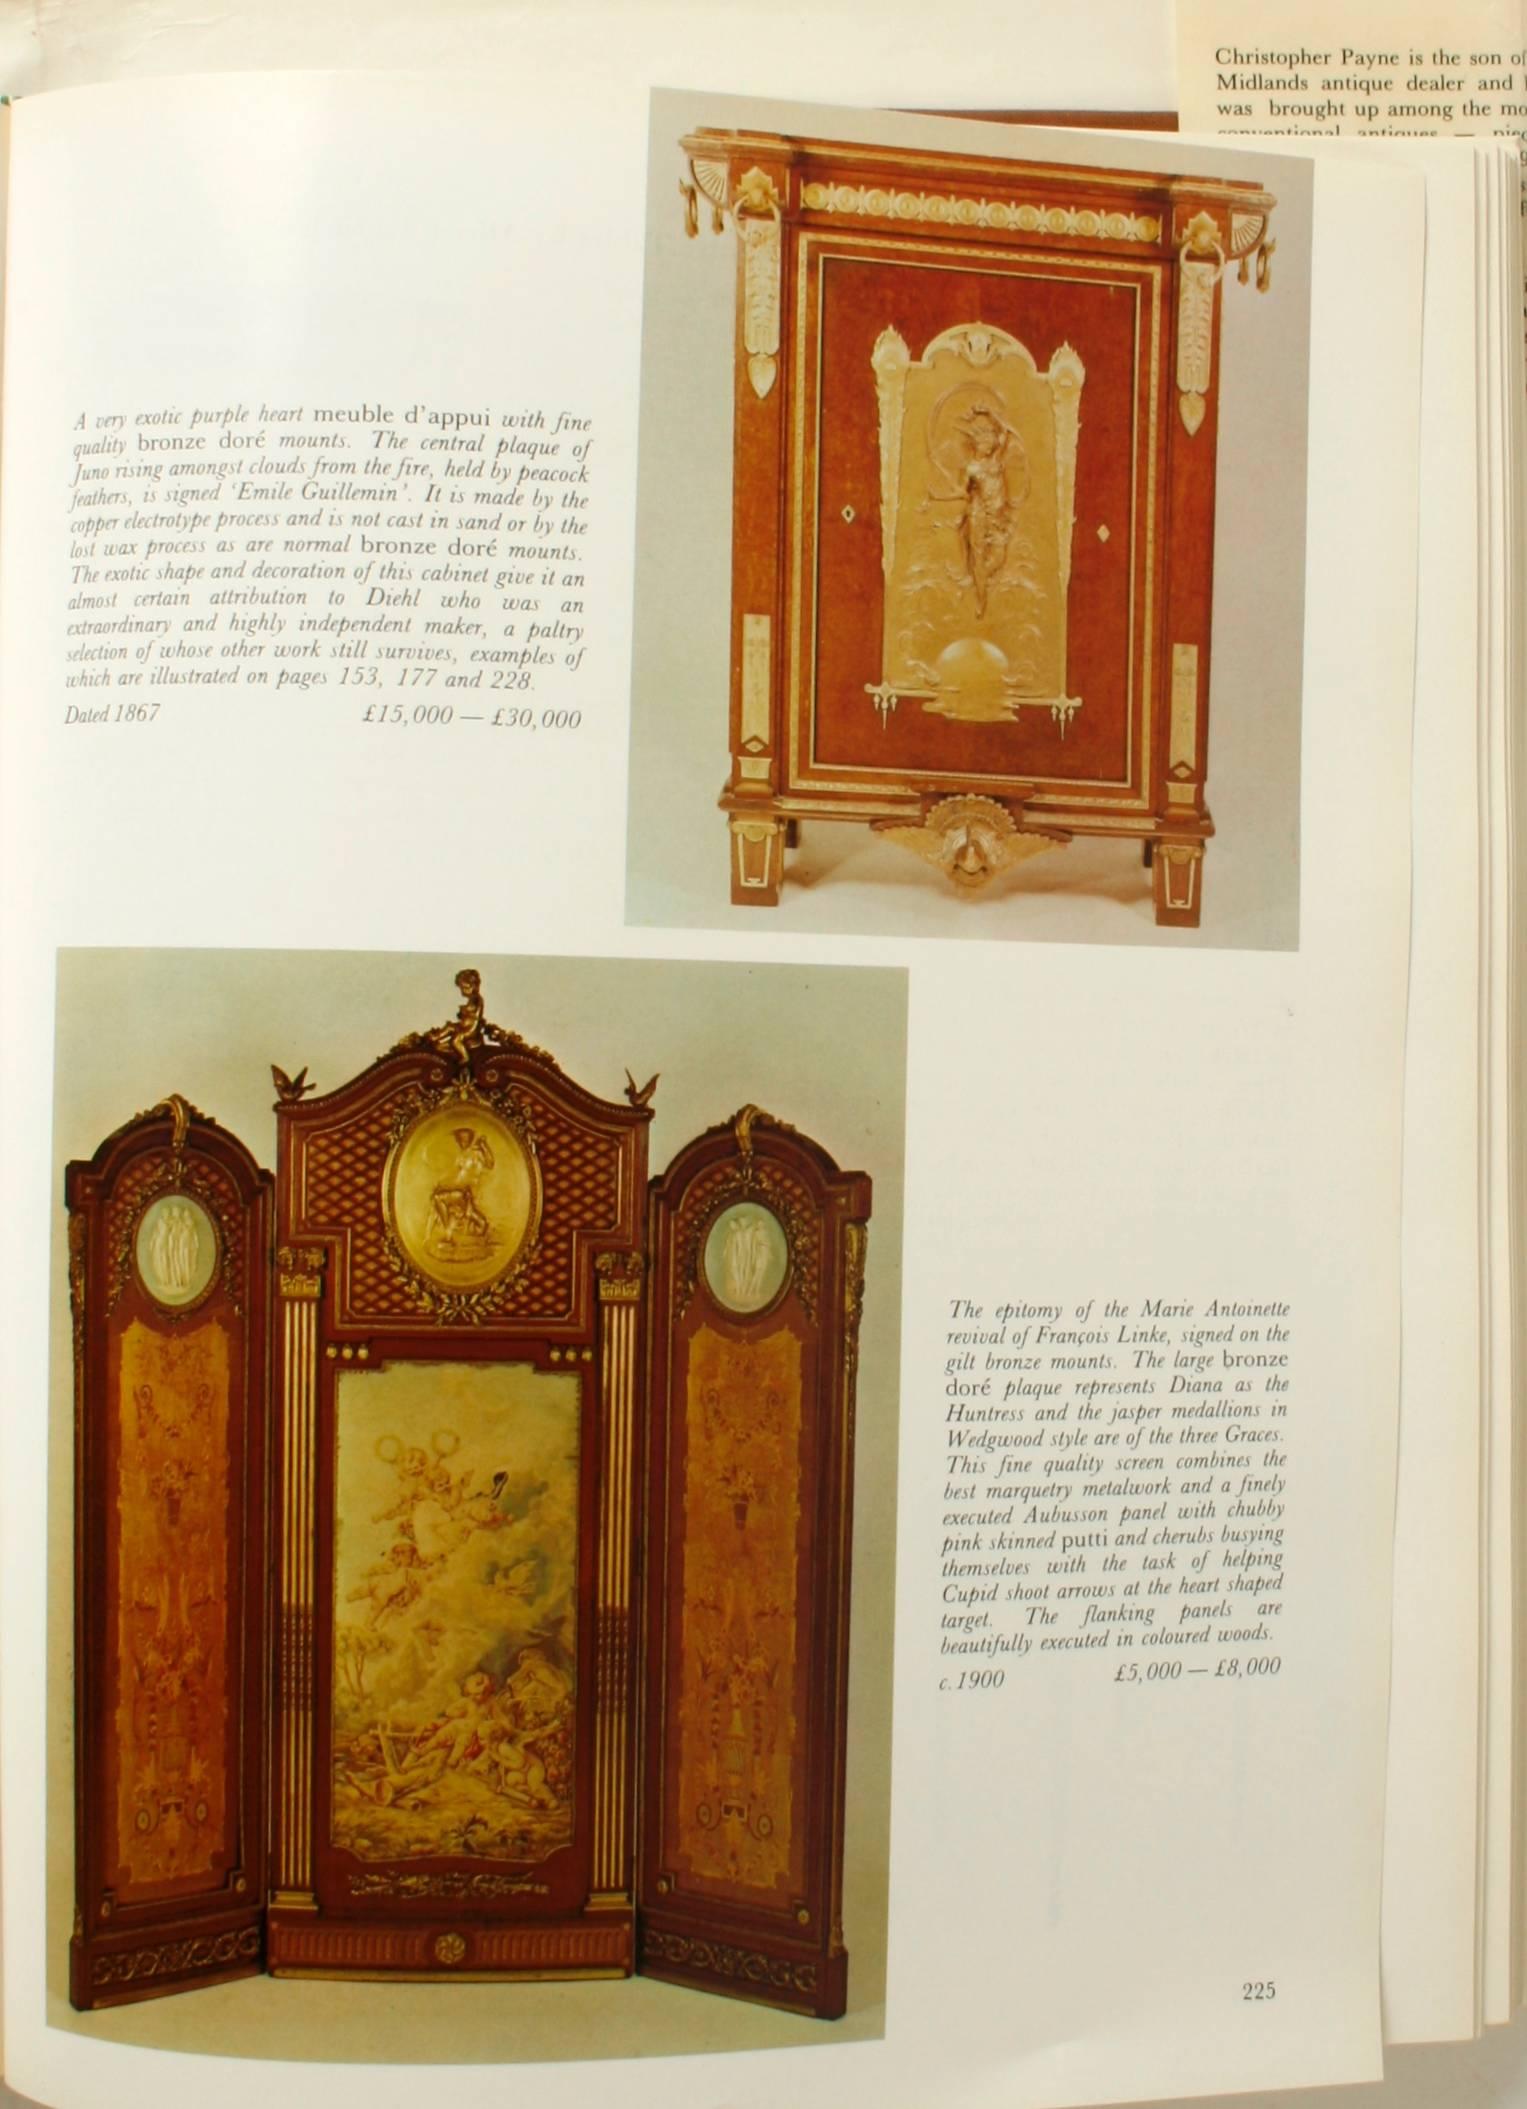 Paper Price Guide to 19th Century European Furniture, First Edition